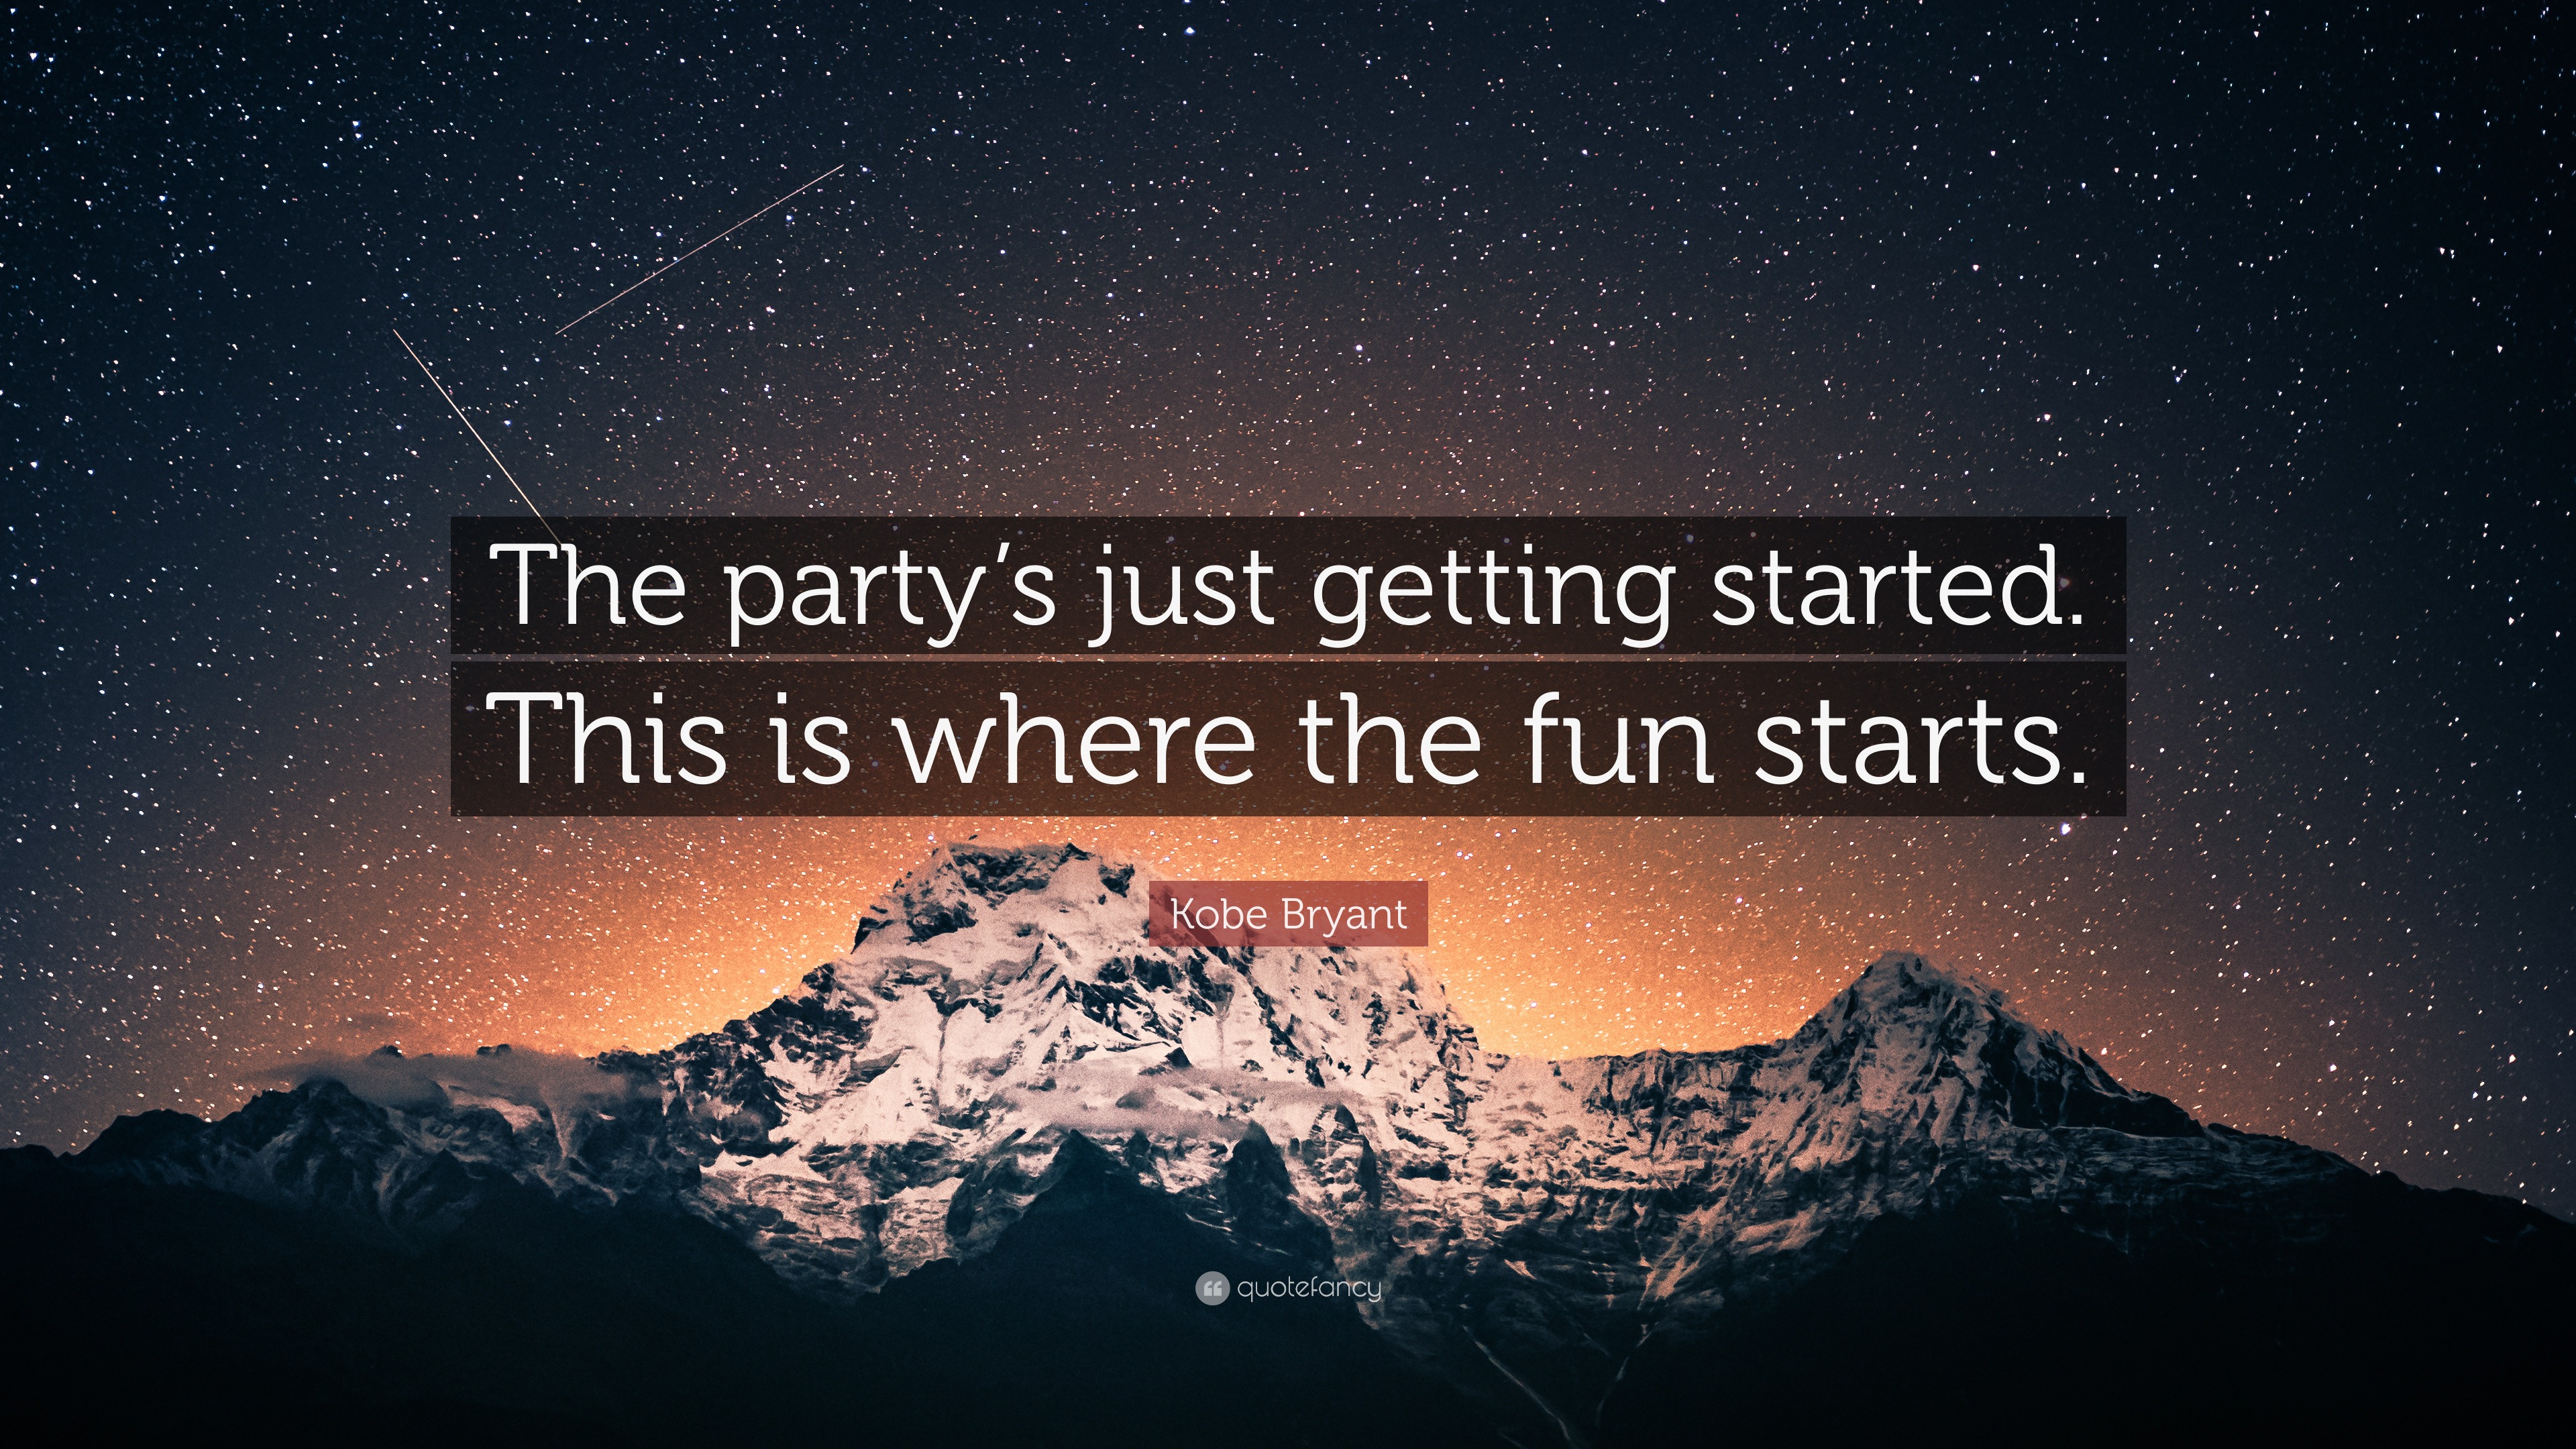 https://quotefancy.com/media/wallpaper/3840x2160/2255519-Kobe-Bryant-Quote-The-party-s-just-getting-started-This-is-where.jpg